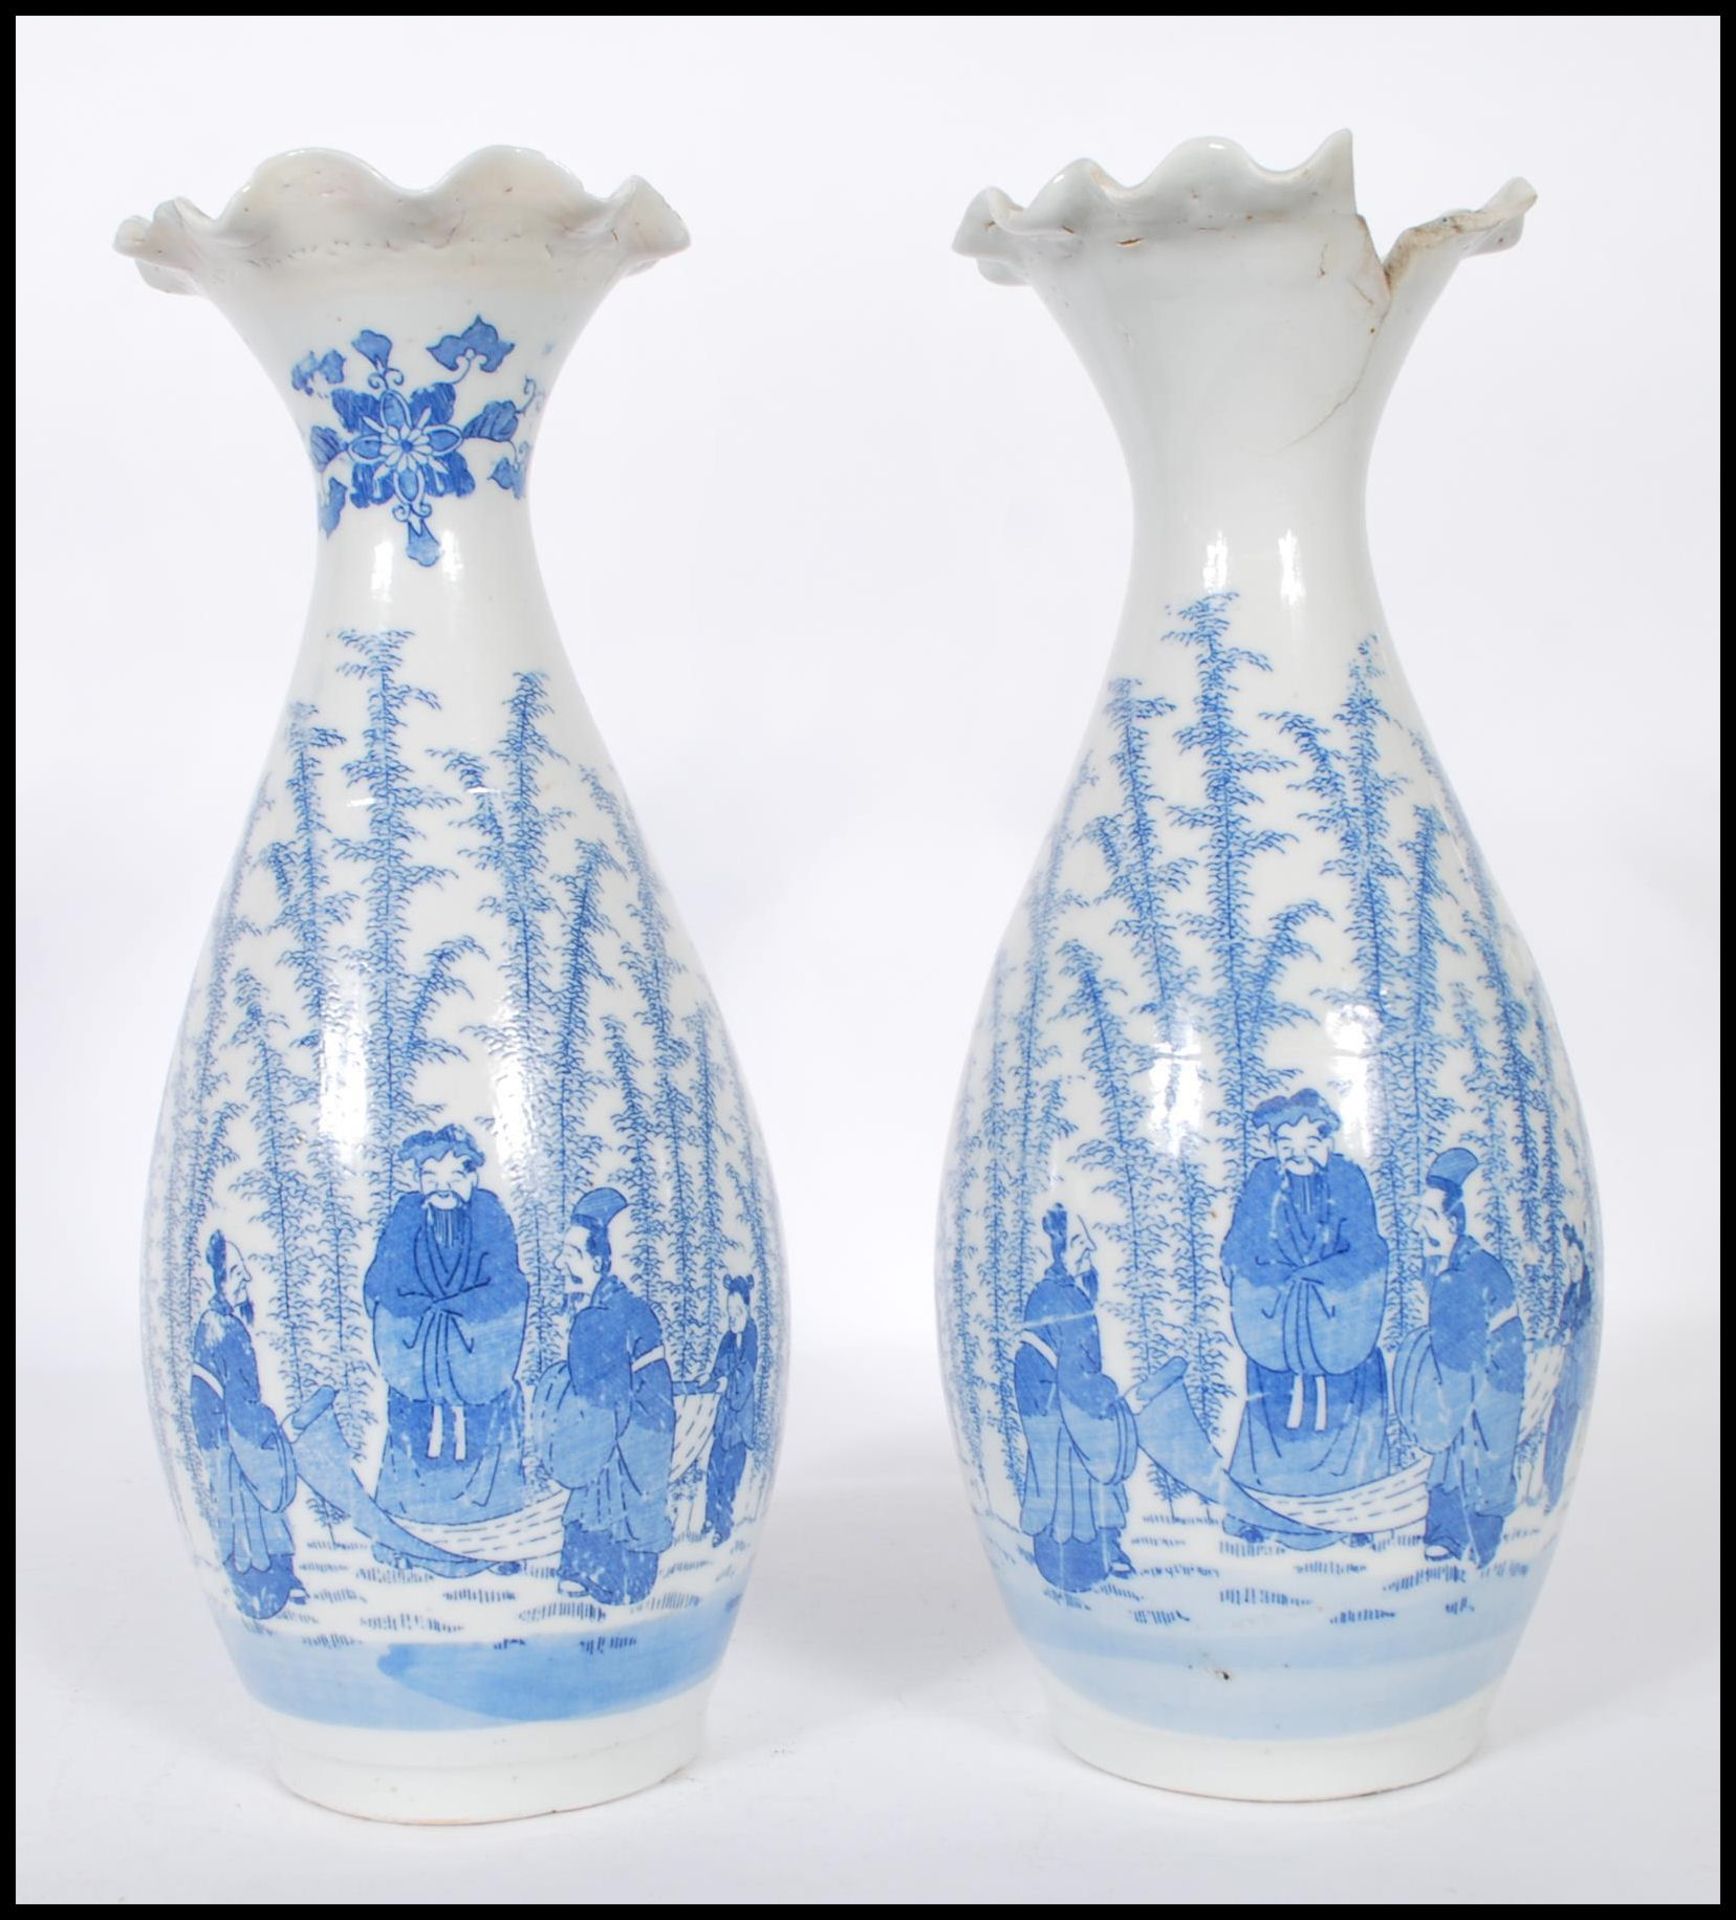 A pair of Japanese porcelain blue and white vases having flared and fanned rims with transfer